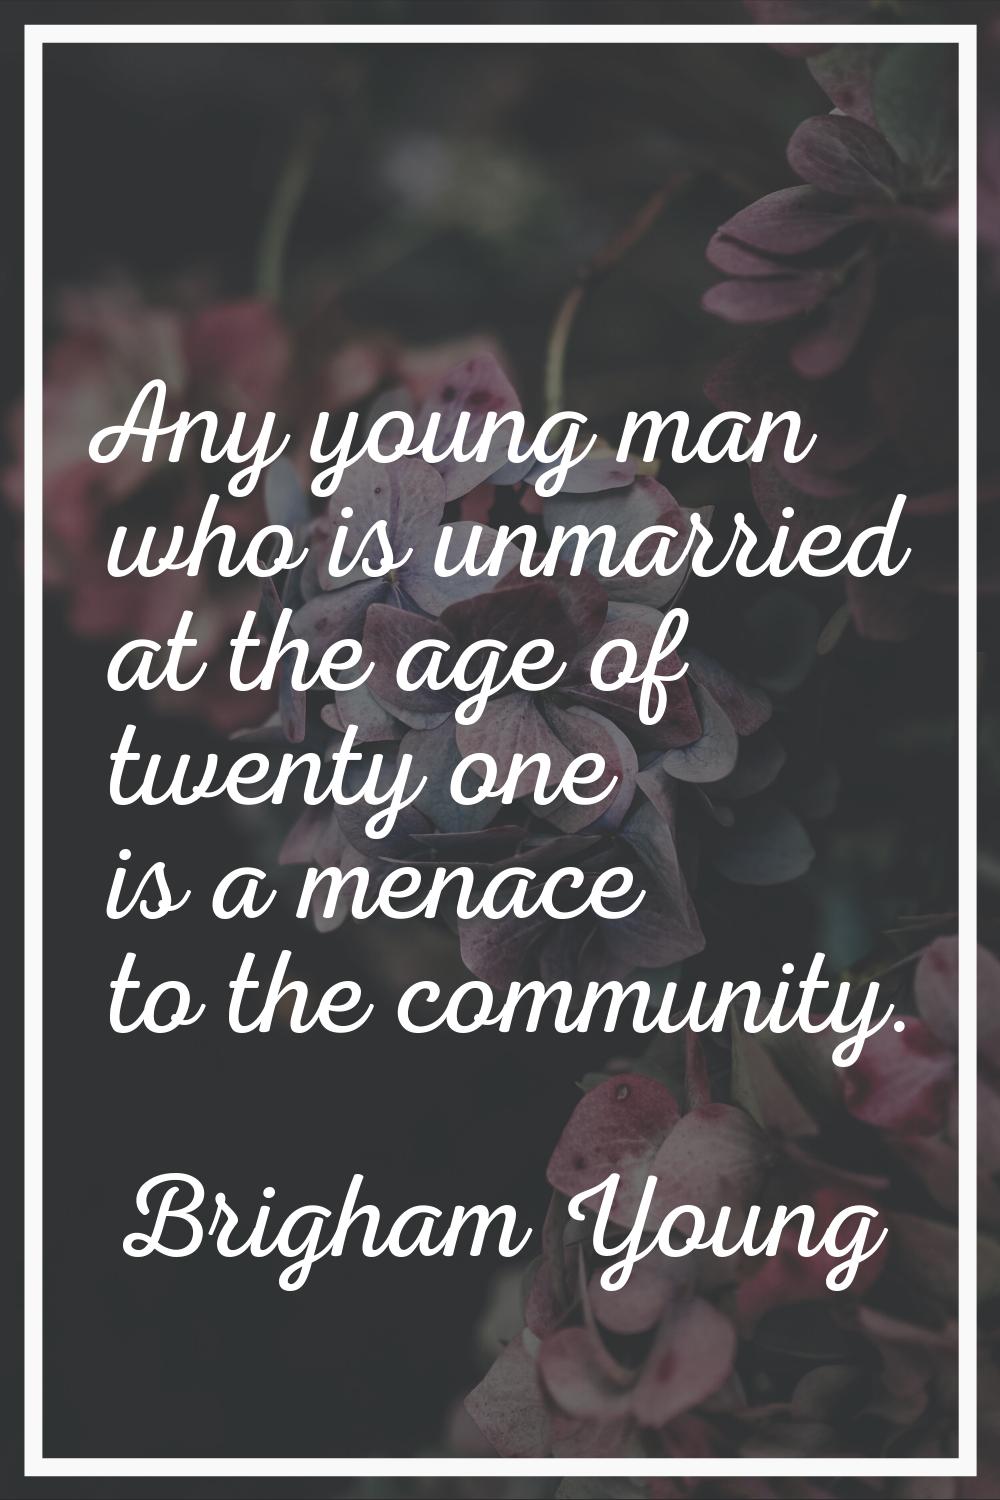 Any young man who is unmarried at the age of twenty one is a menace to the community.